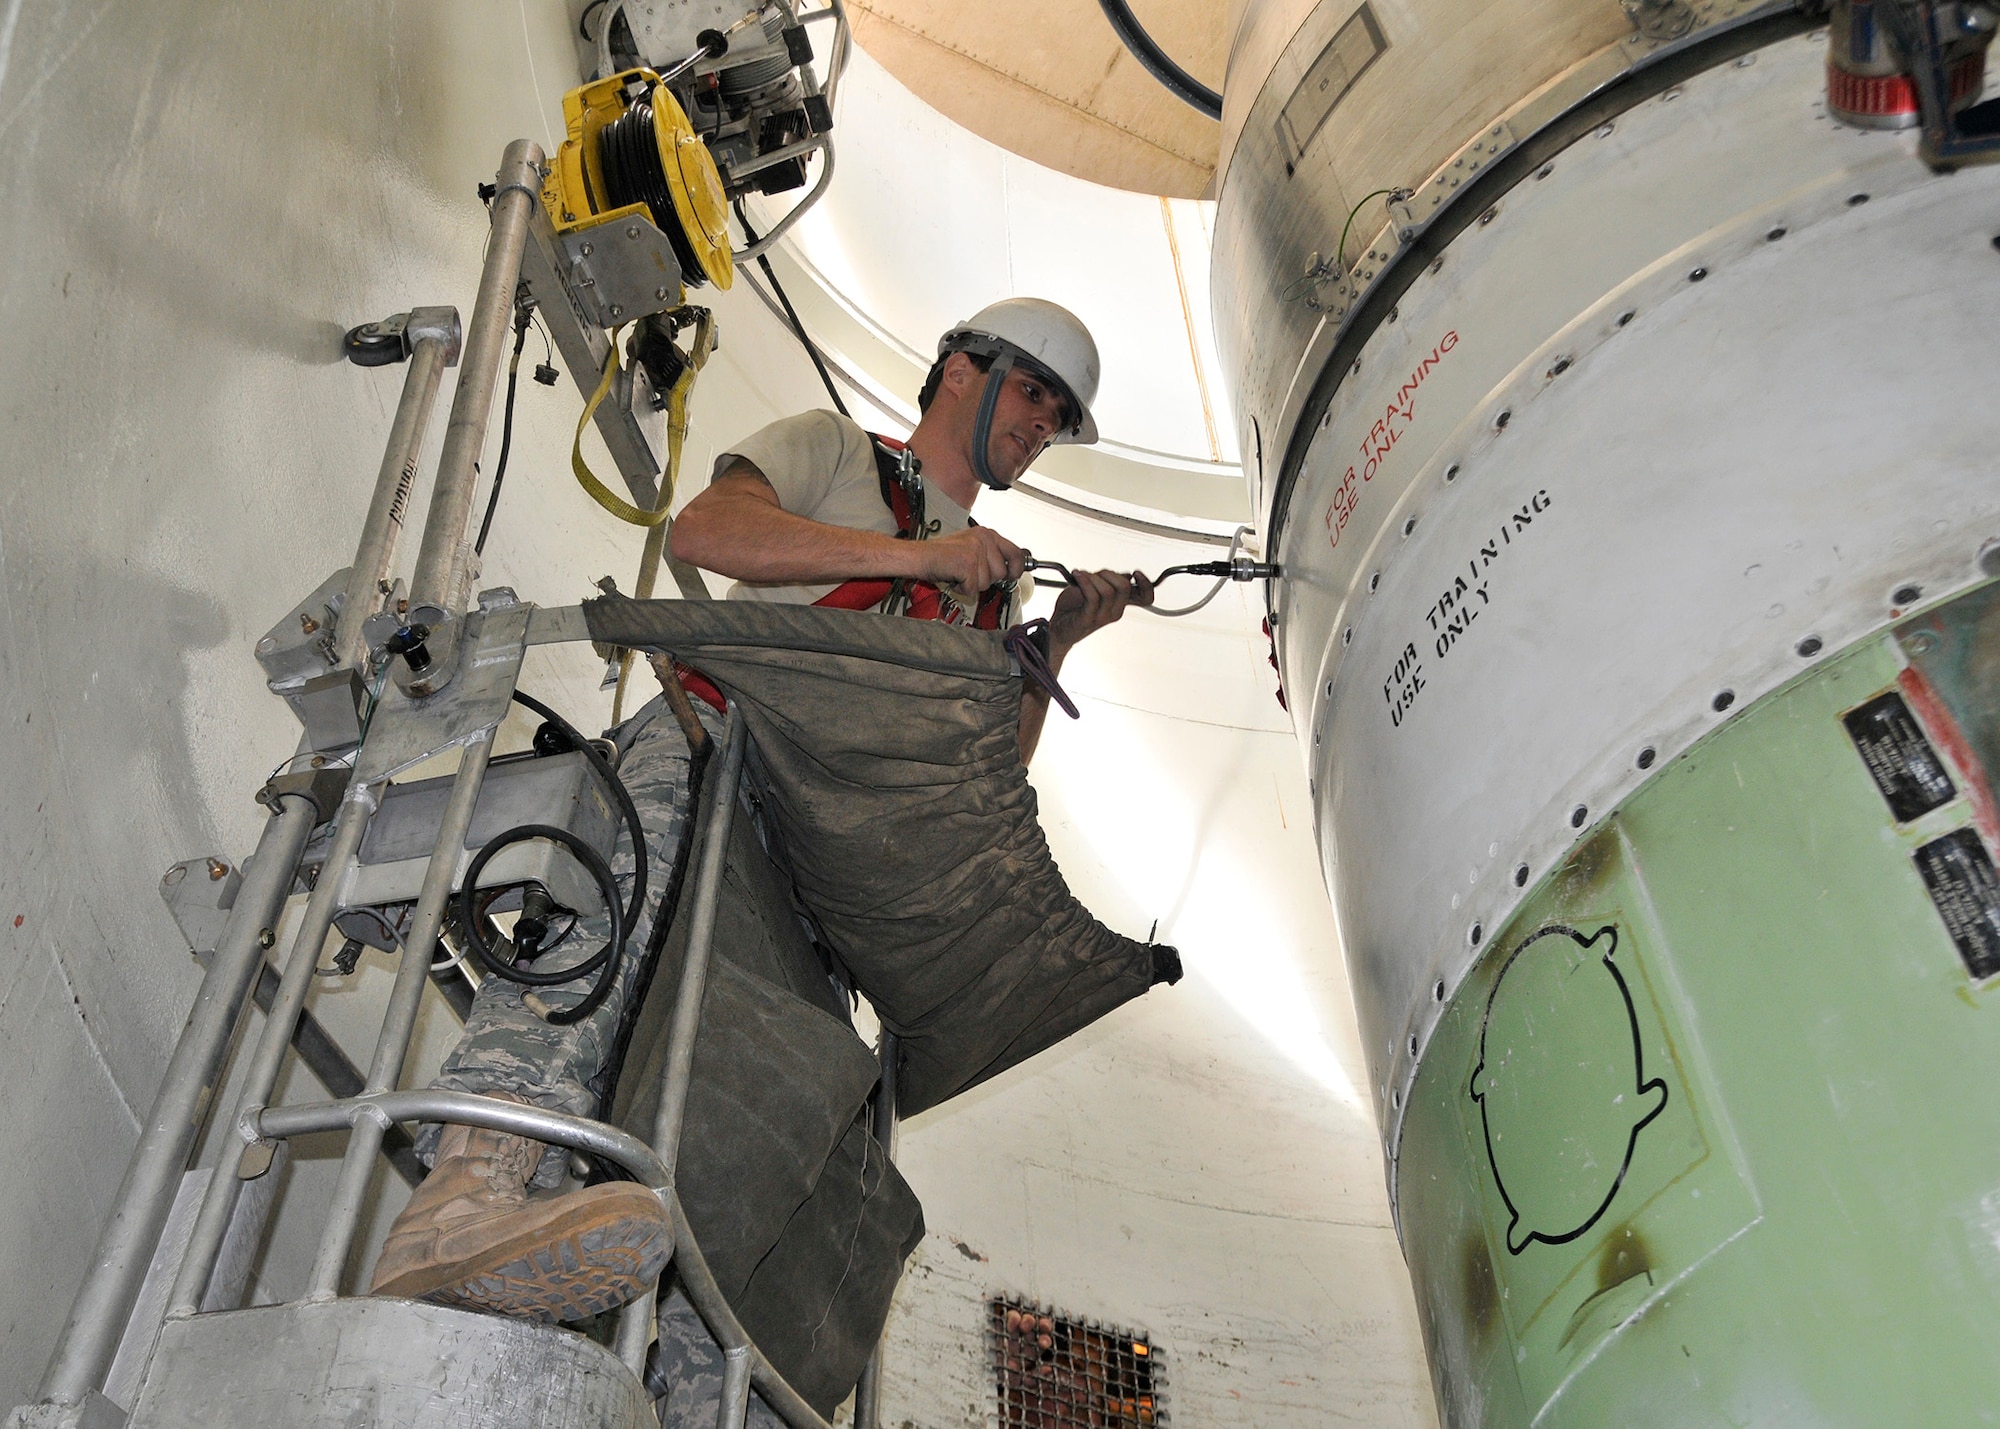 Staff Sgt. Isaiah Miller, 341st Missile Maintenance Squadron, uses a guided missile maintenance platform May 7, 2010, to remove bolts securing the reentry system on a mock-up of a Minuteman III missile during a maintenance training exercise at Malmstrom Air Force Base’s T-9 launch facility maintenance trainer. (U.S. Air Force photo/John Turner)